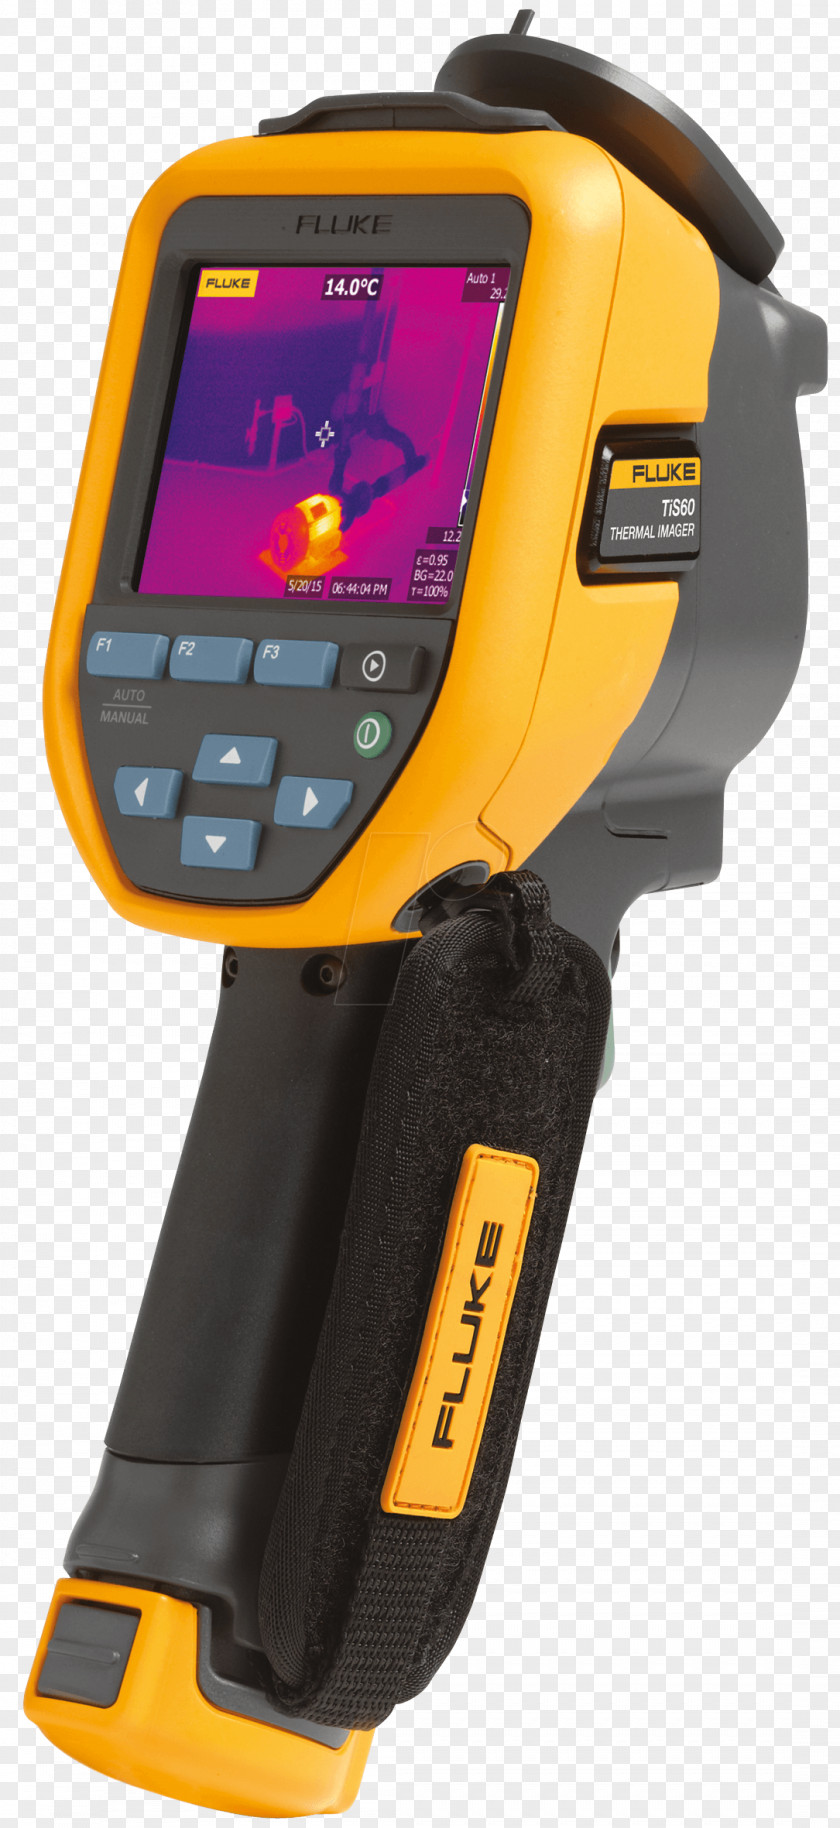 Camera Fluke Corporation Thermographic Thermography Thermal Imaging PNG